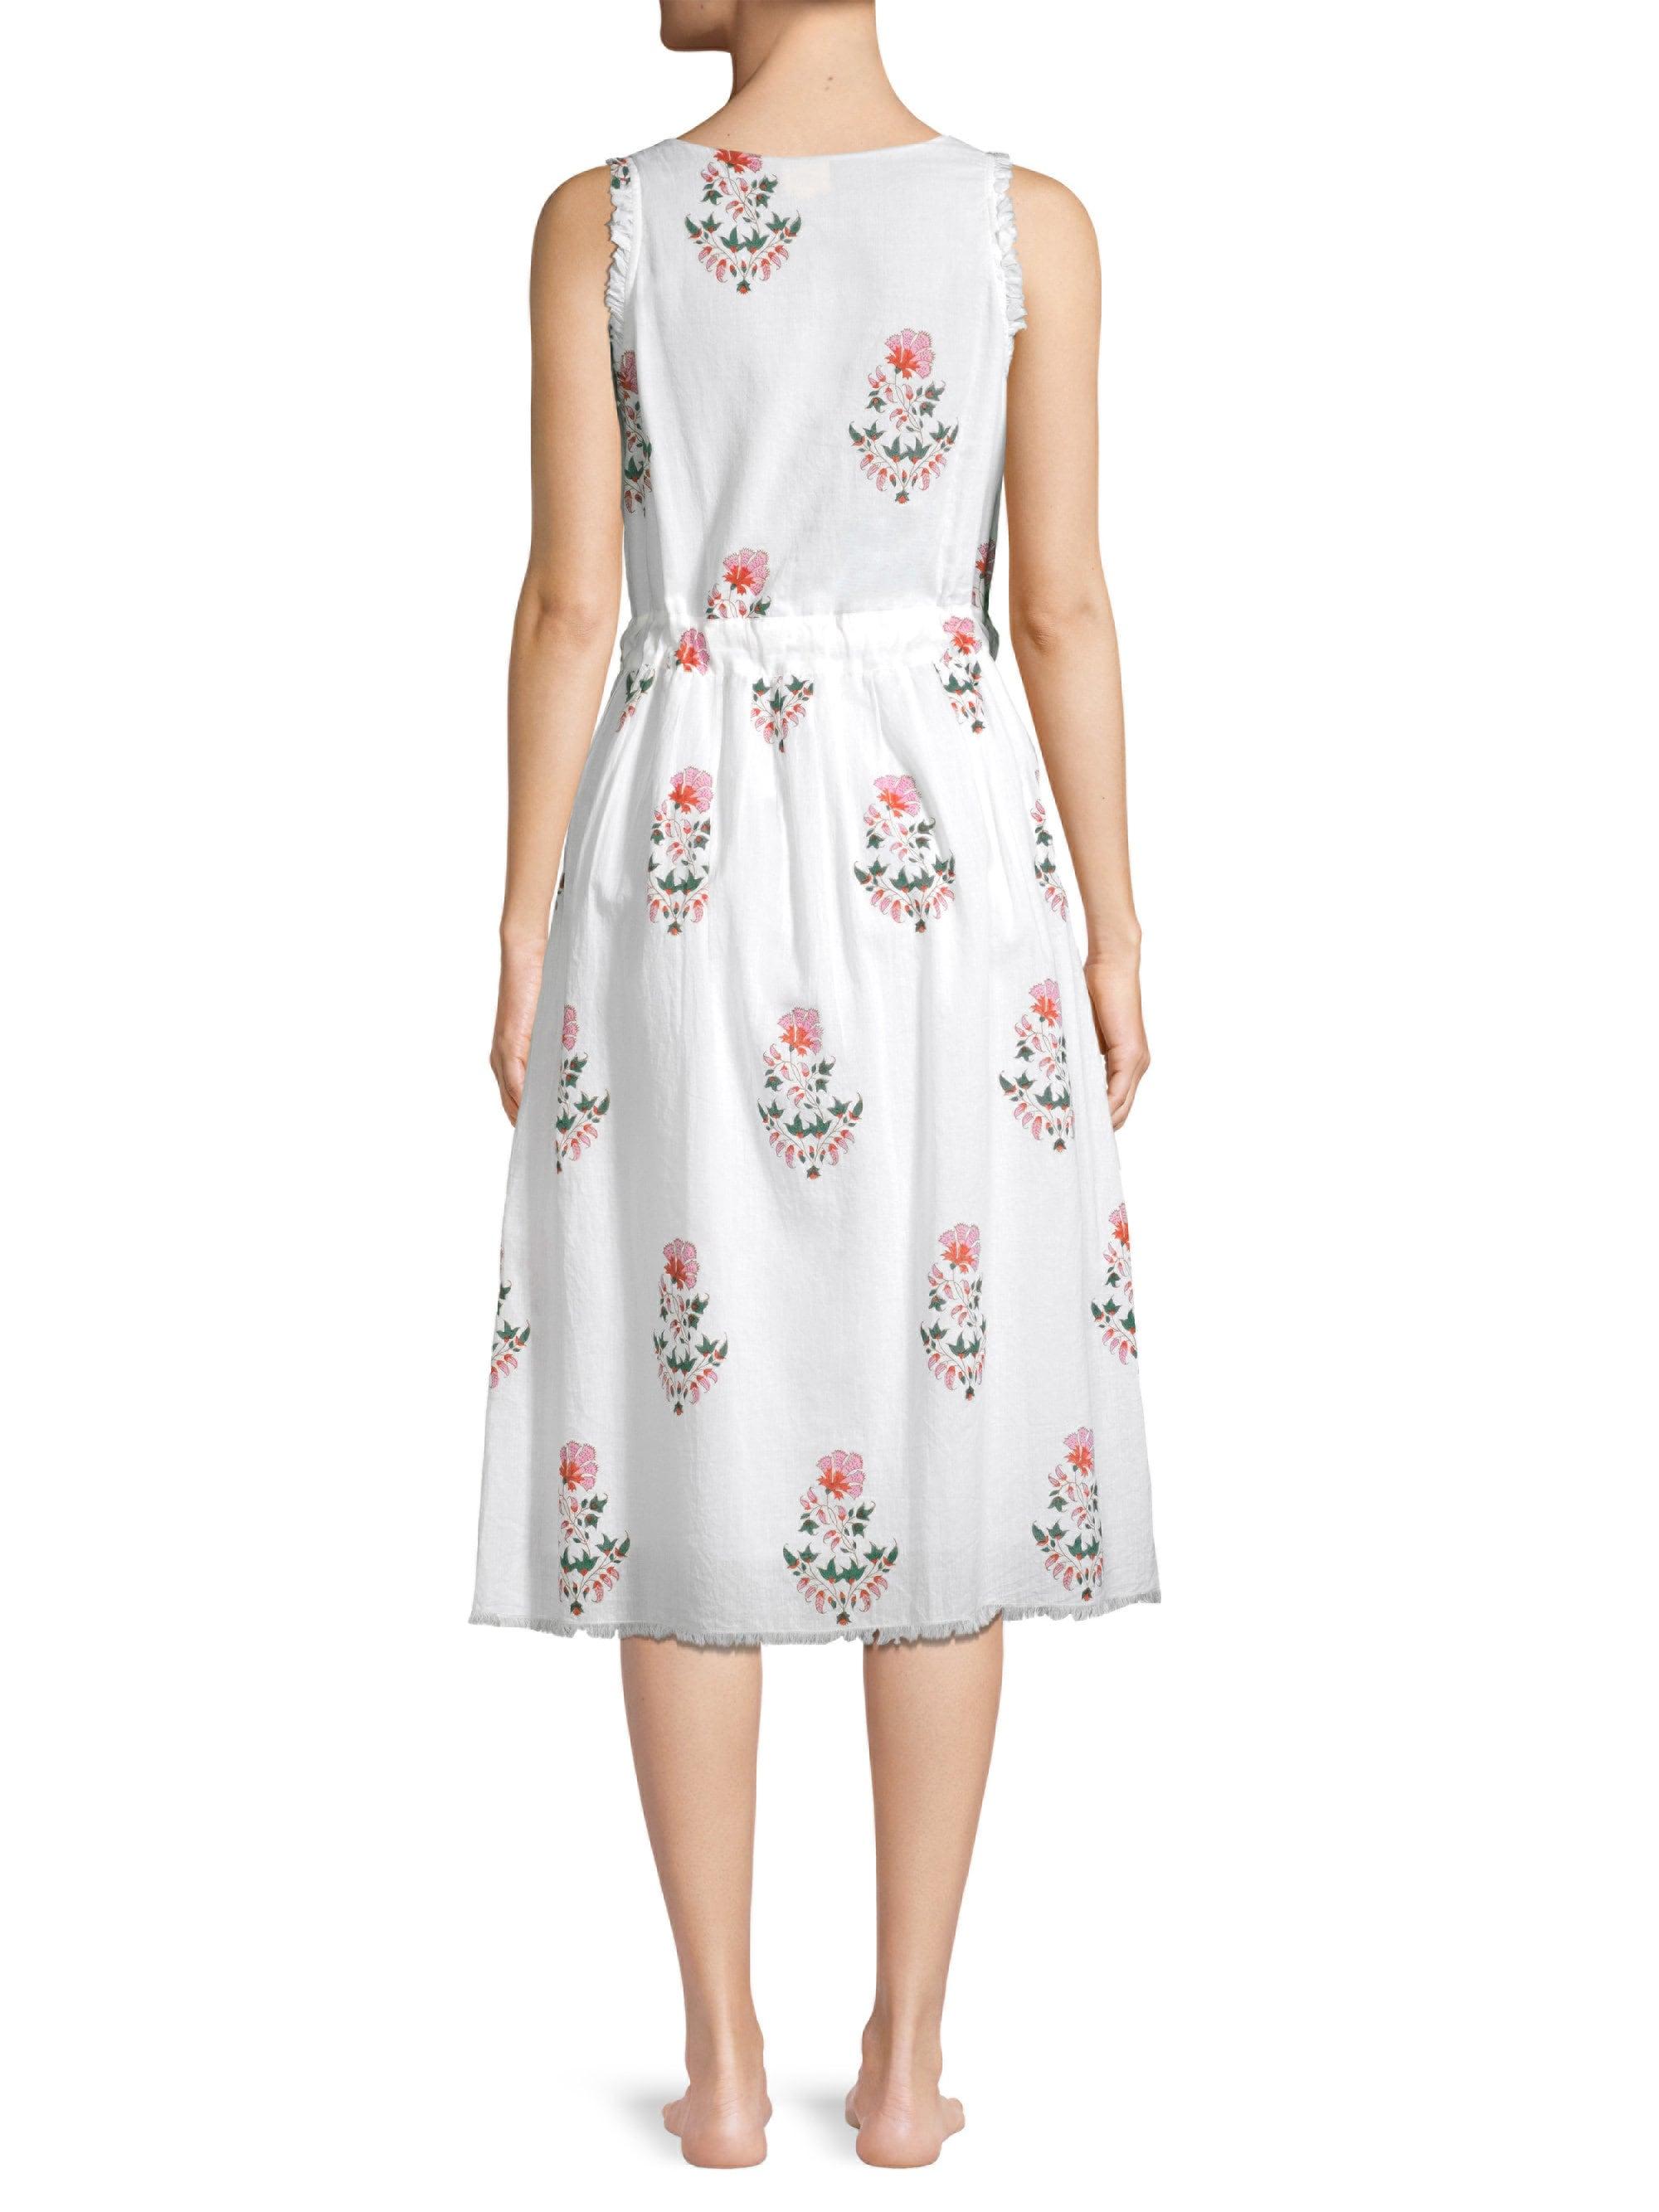 Roberta Roller Rabbit Arelle Maddie Sleeveless Floral Dress in Pink - Lyst